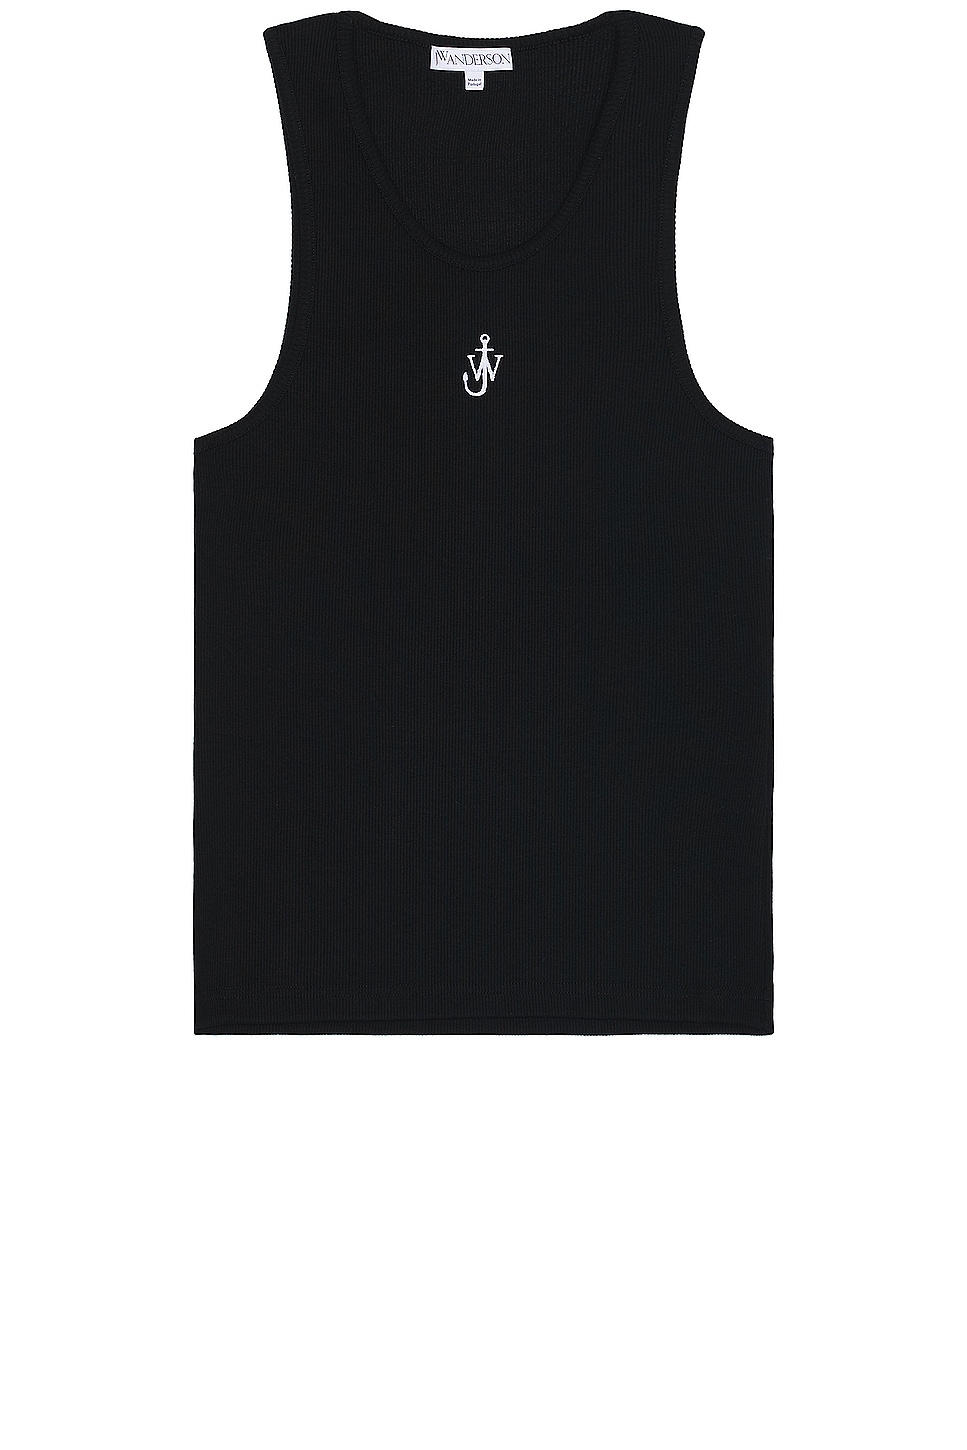 Image 1 of JW Anderson Anchor Embroidery Tank Top in Black